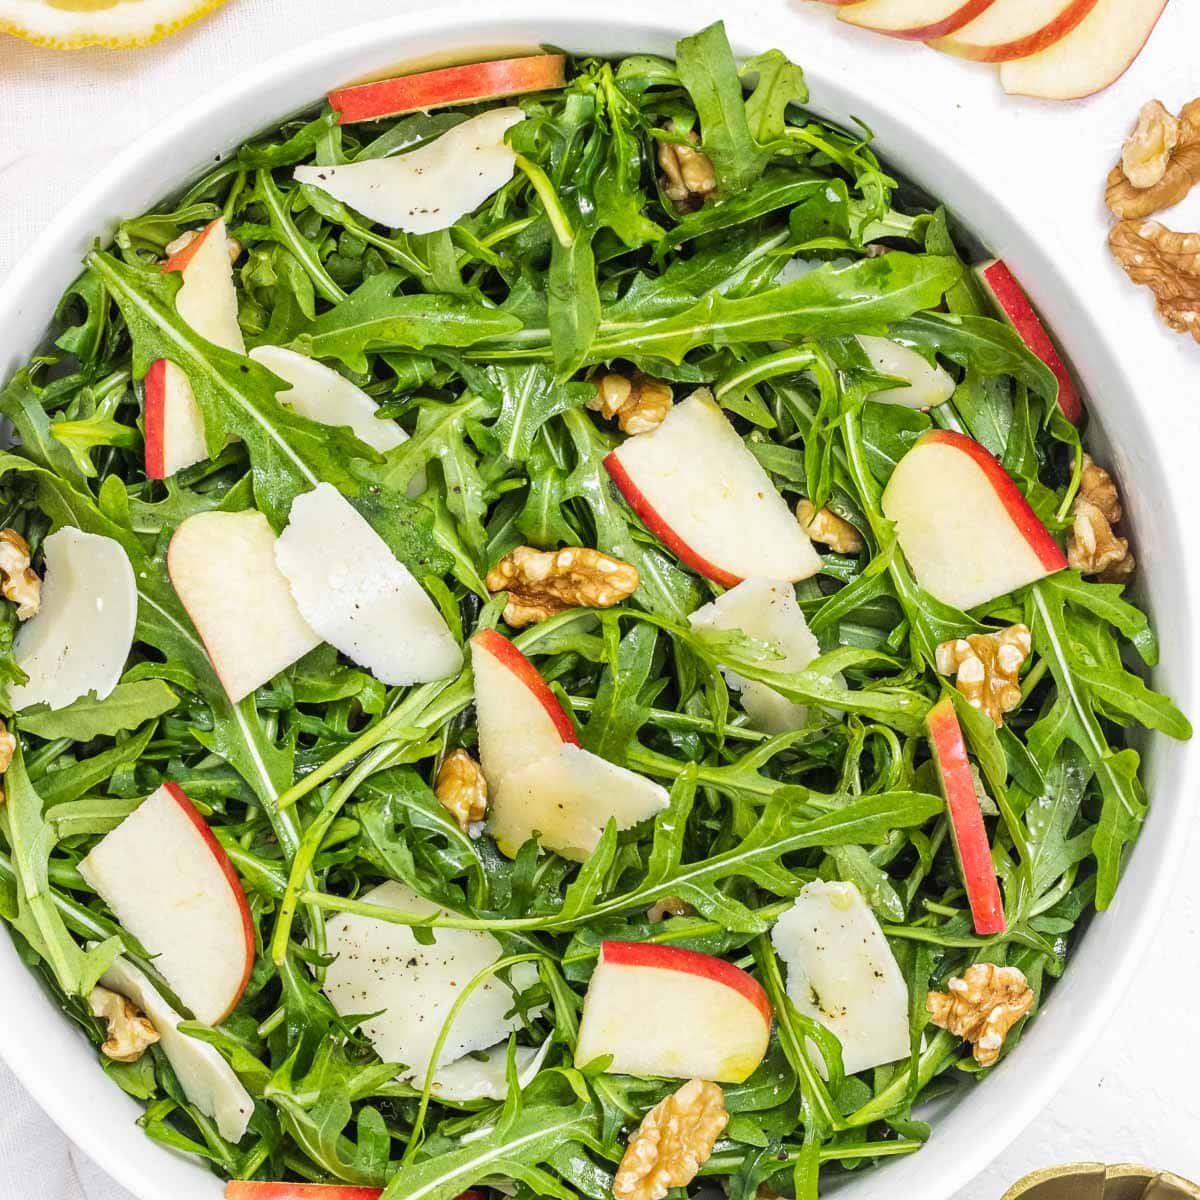 Arugula salad with walnuts and red apple